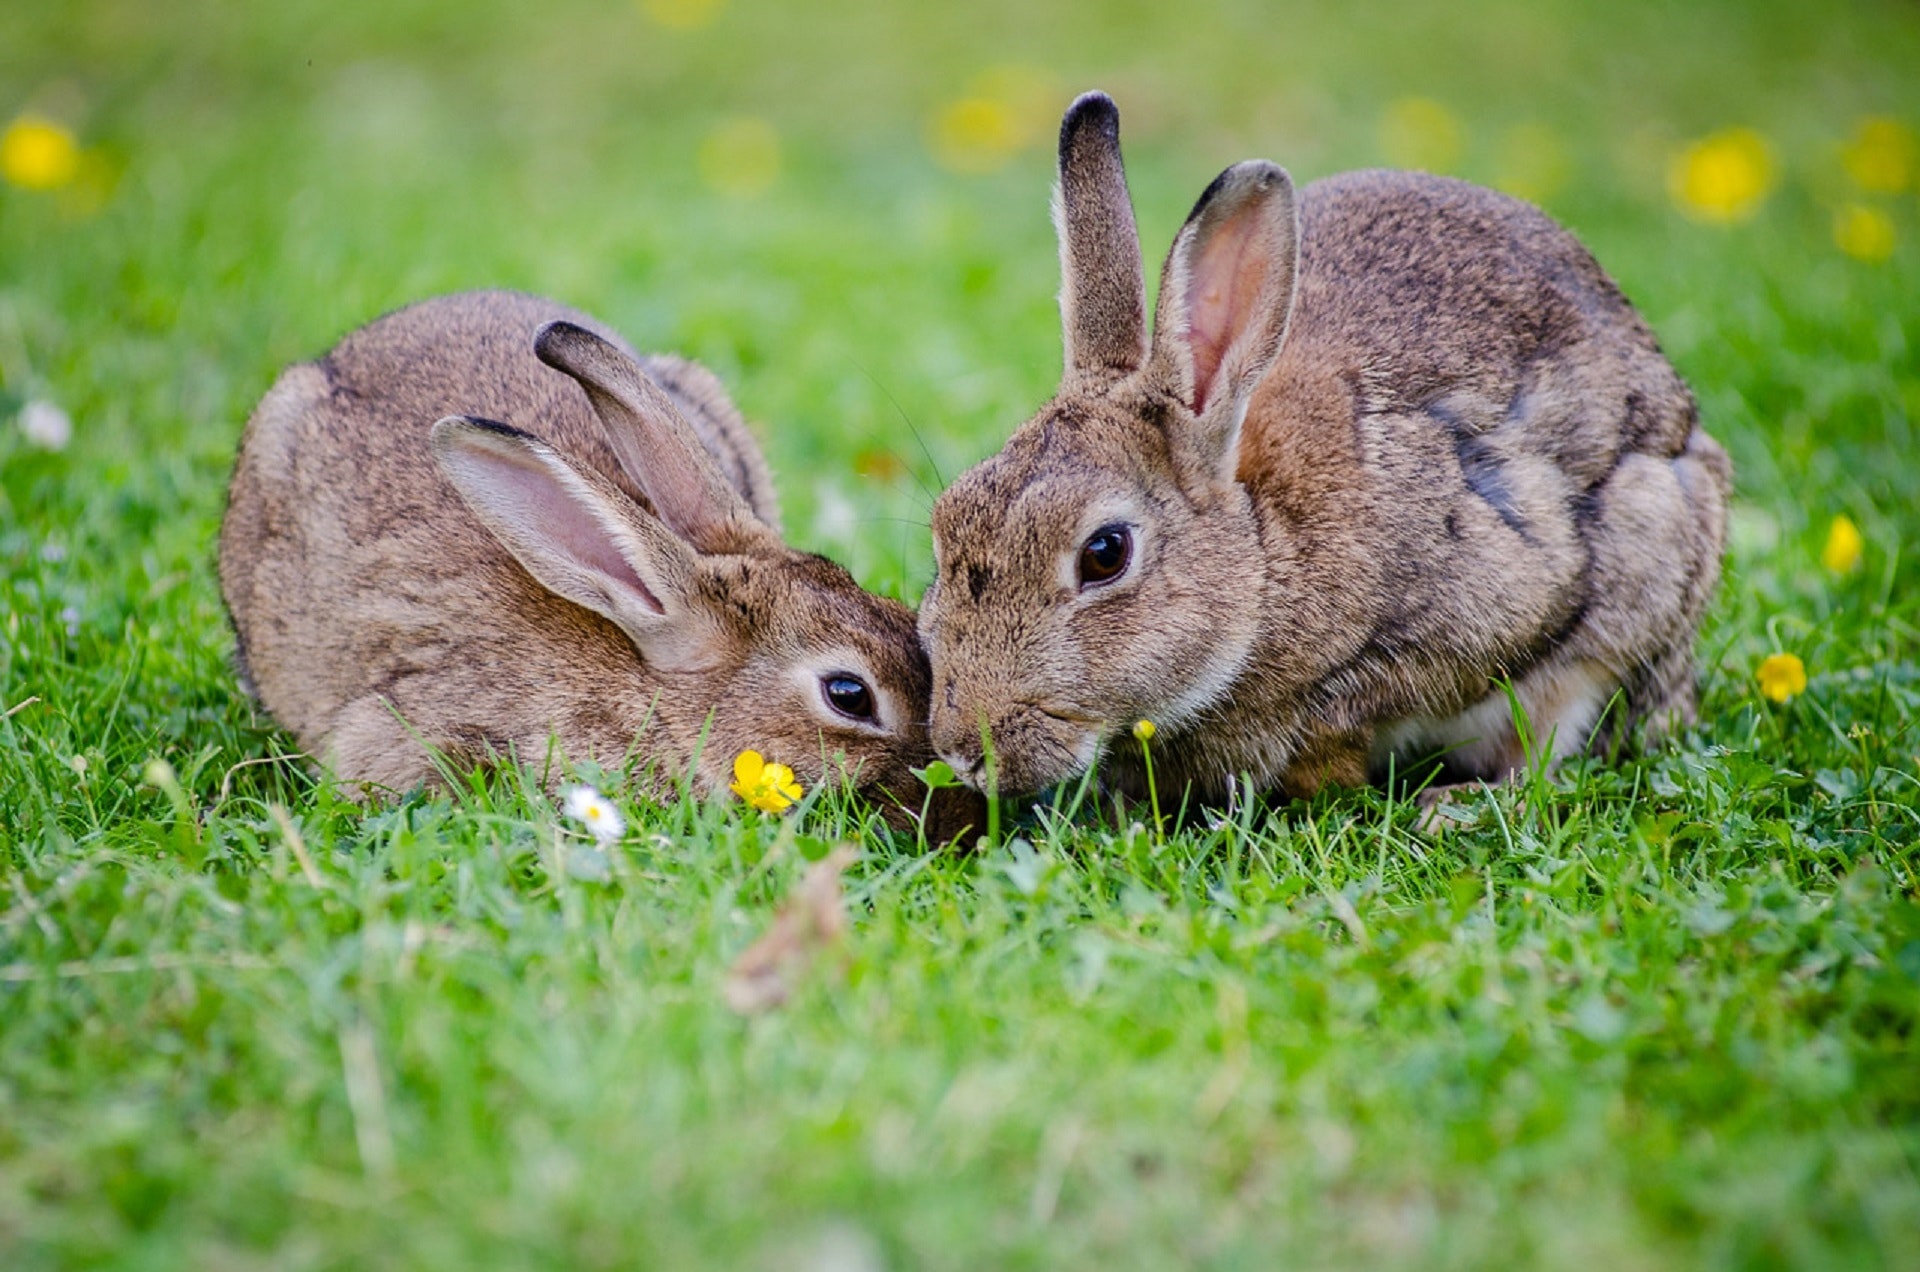 Potential Dangers Of The Crepuscular Lifestyle For Rabbits